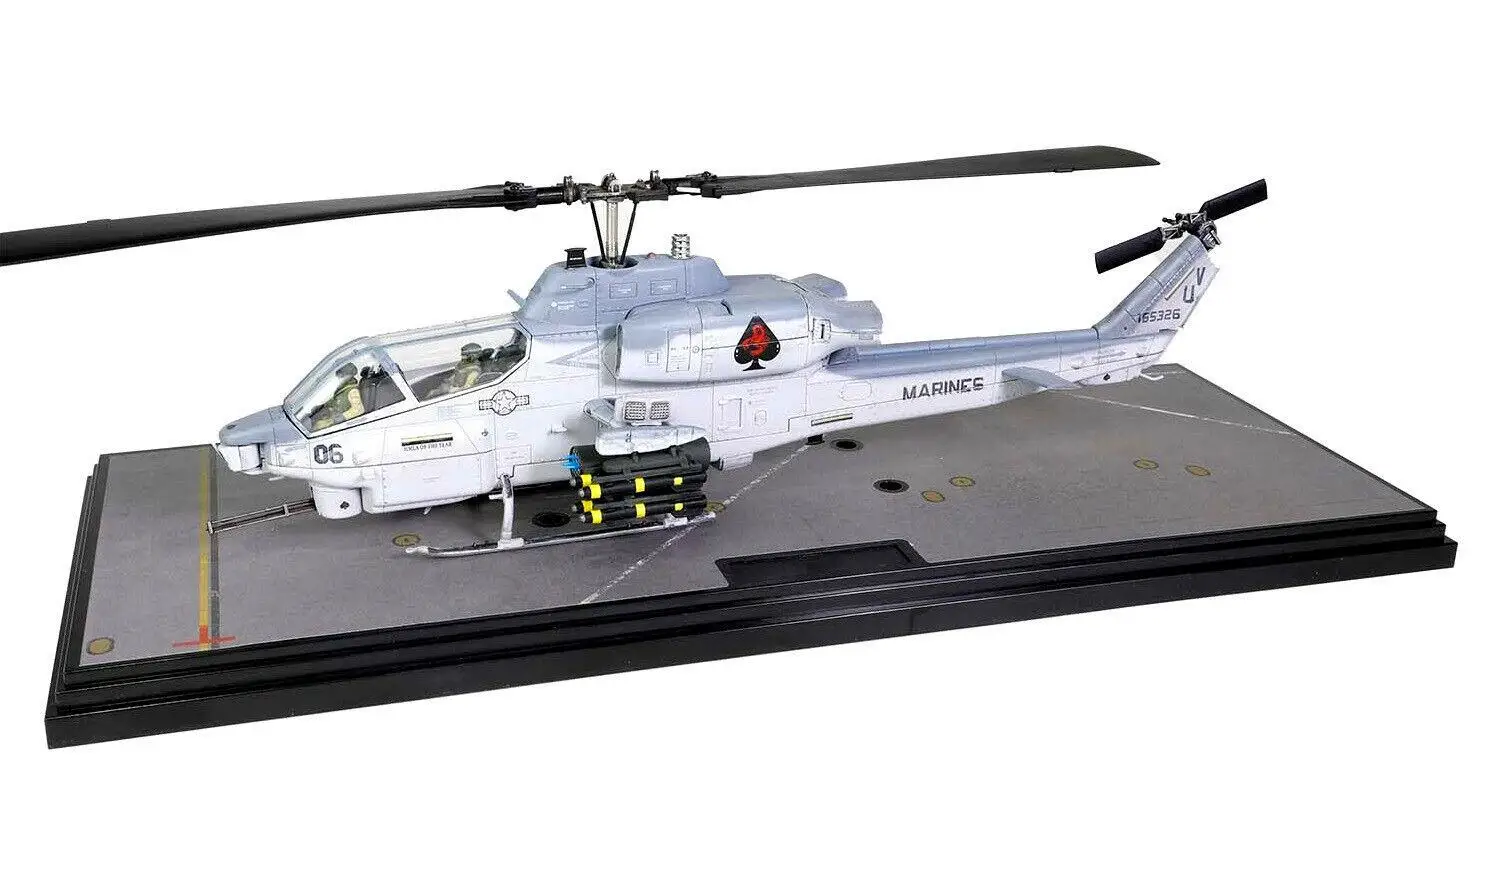 

Forces of Valor 1/48 USMC Bell AH-1W "Whiskey" Super Cobra Attack Helicopter